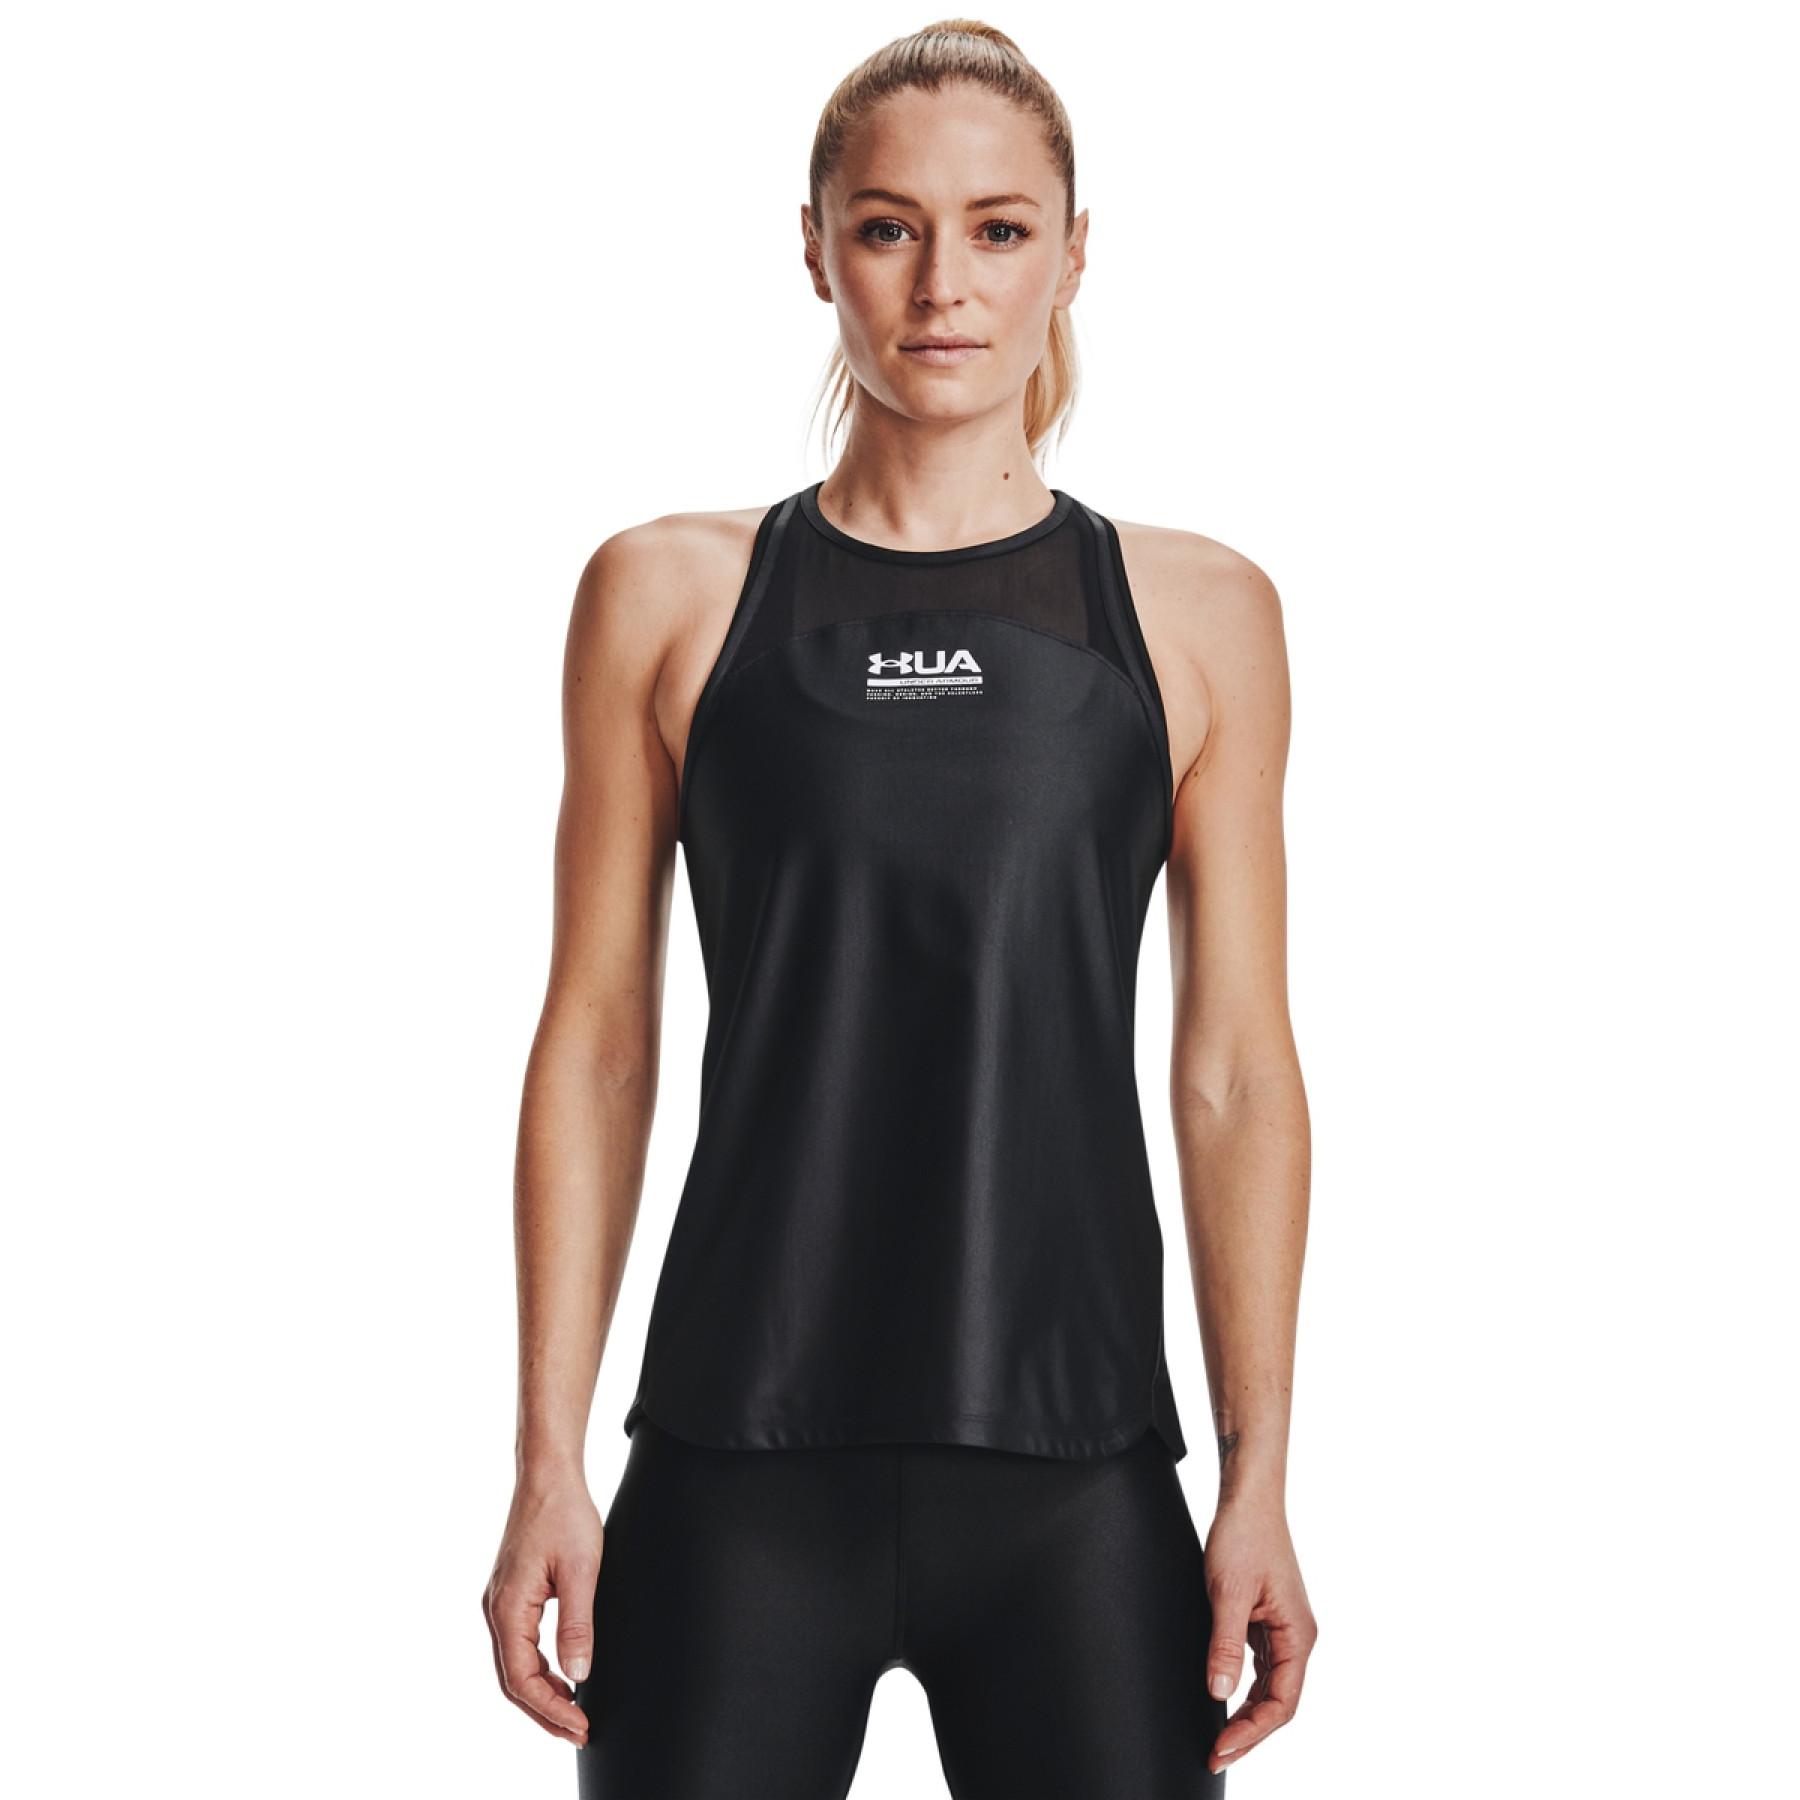 Damski tank top Under Armour iso-chill